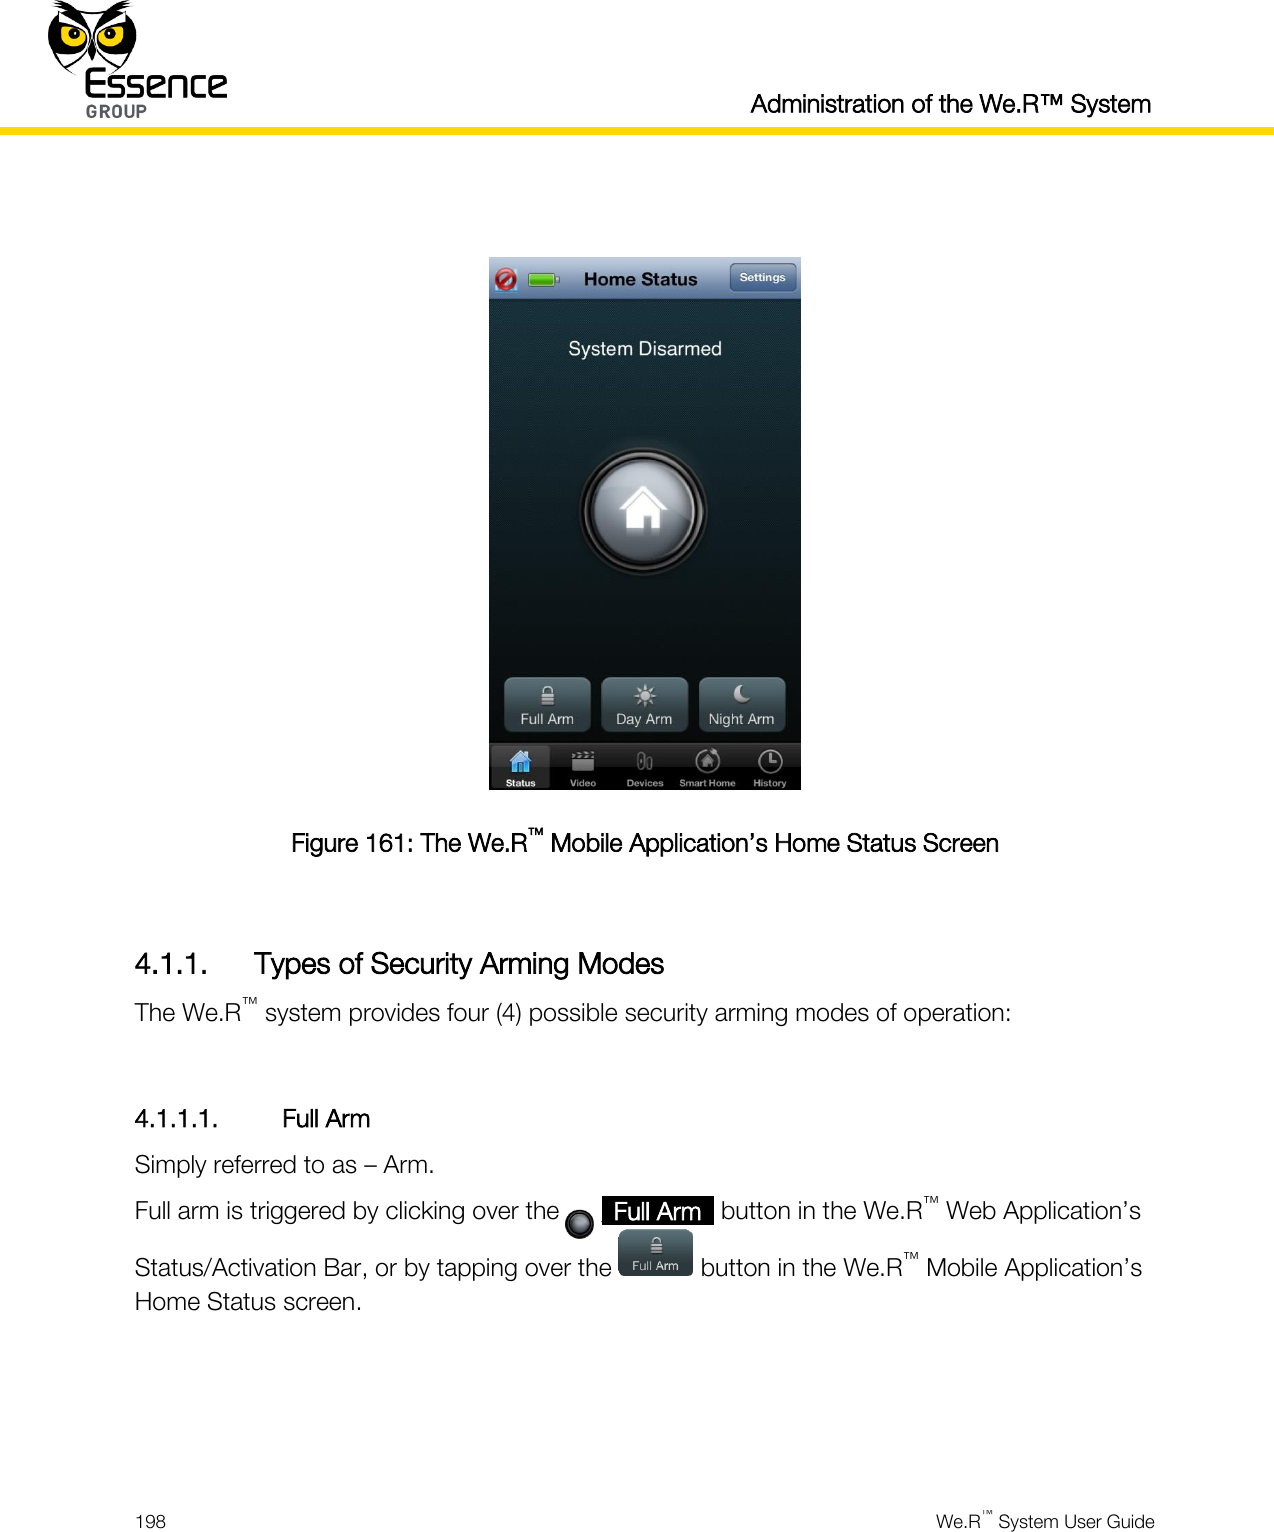  Administration of the We.R™ System  198  We.R™ System User Guide    Figure 161: The We.R™ Mobile Application’s Home Status Screen  4.1.1. Types of Security Arming Modes The We.R™ system provides four (4) possible security arming modes of operation:  4.1.1.1. Full Arm Simply referred to as – Arm. Full arm is triggered by clicking over the      _Full Arm_ button in the We.R™ Web Application’s Status/Activation Bar, or by tapping over the   button in the We.R™ Mobile Application’s Home Status screen.    